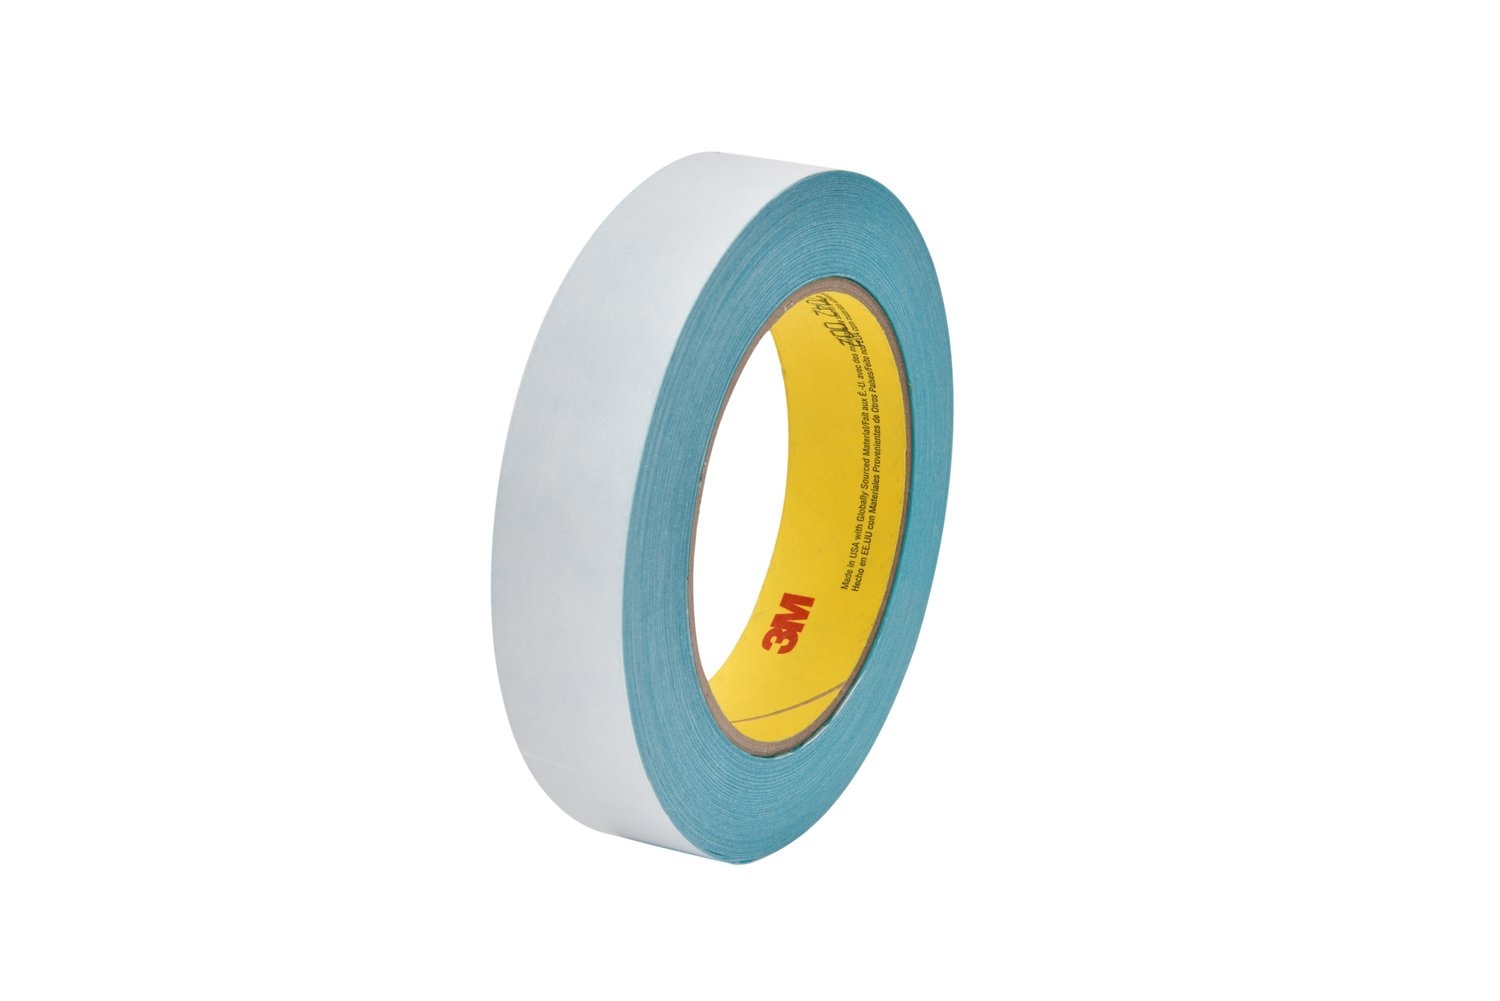 7100027394 - 3M Repulpable Double Coated Flying Splice Tape 913, Blue, 48 mm x 33 m,
3 mil, 24 rolls per case